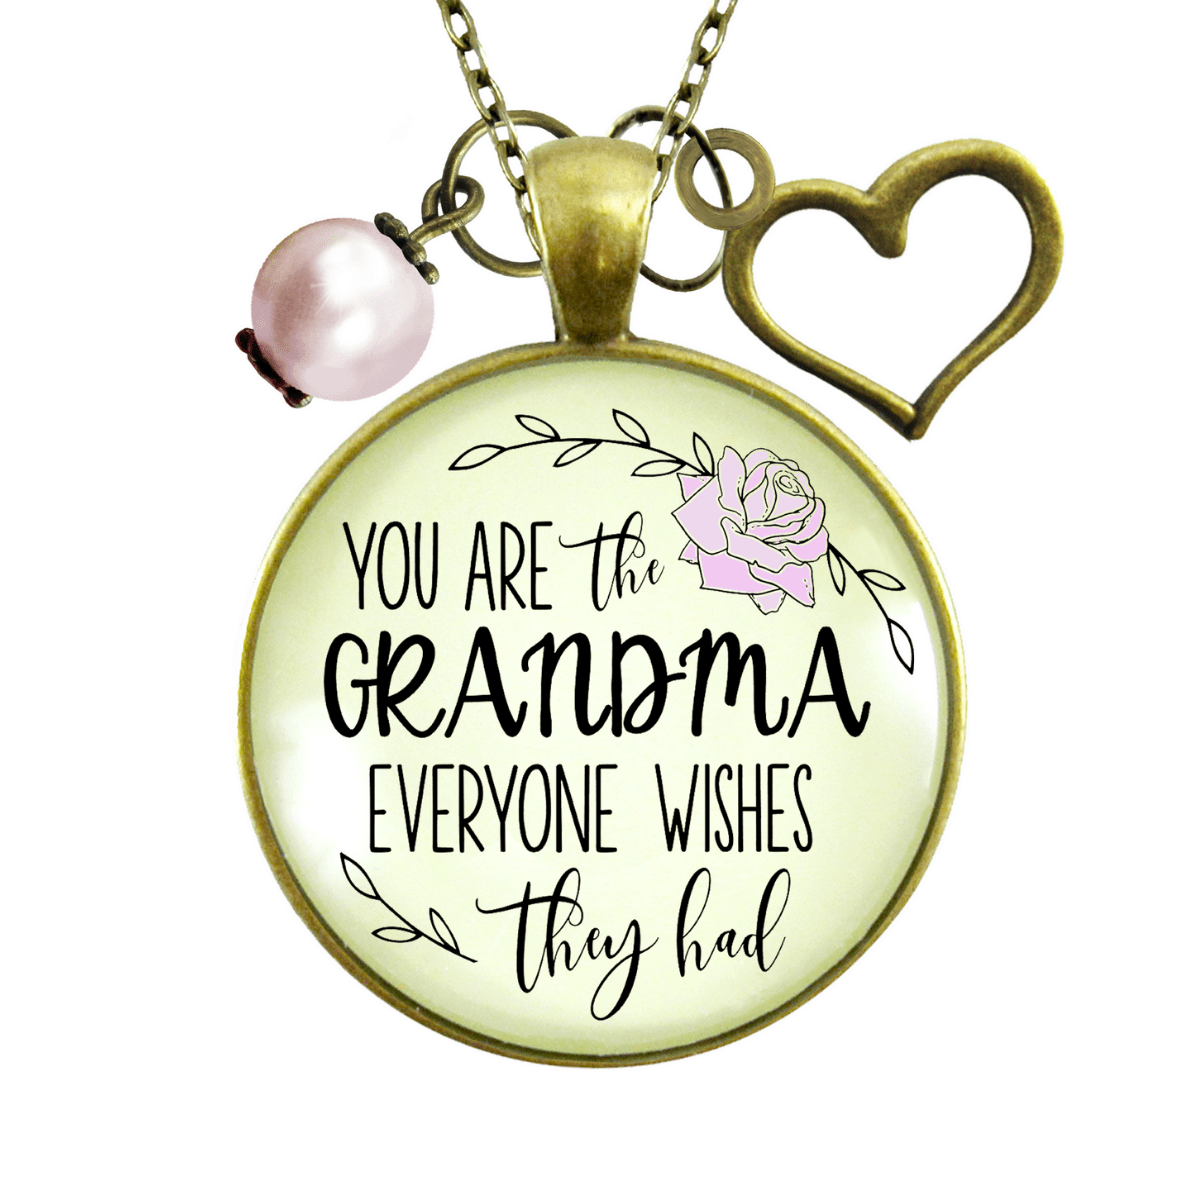 Gutsy Goodness Grandma Necklace You Are The Grandma Everyone Wishes For Gift Jewelry - Gutsy Goodness Handmade Jewelry;Grandma Necklace You Are The Grandma Everyone Wishes For Gift Jewelry - Gutsy Goodness Handmade Jewelry Gifts